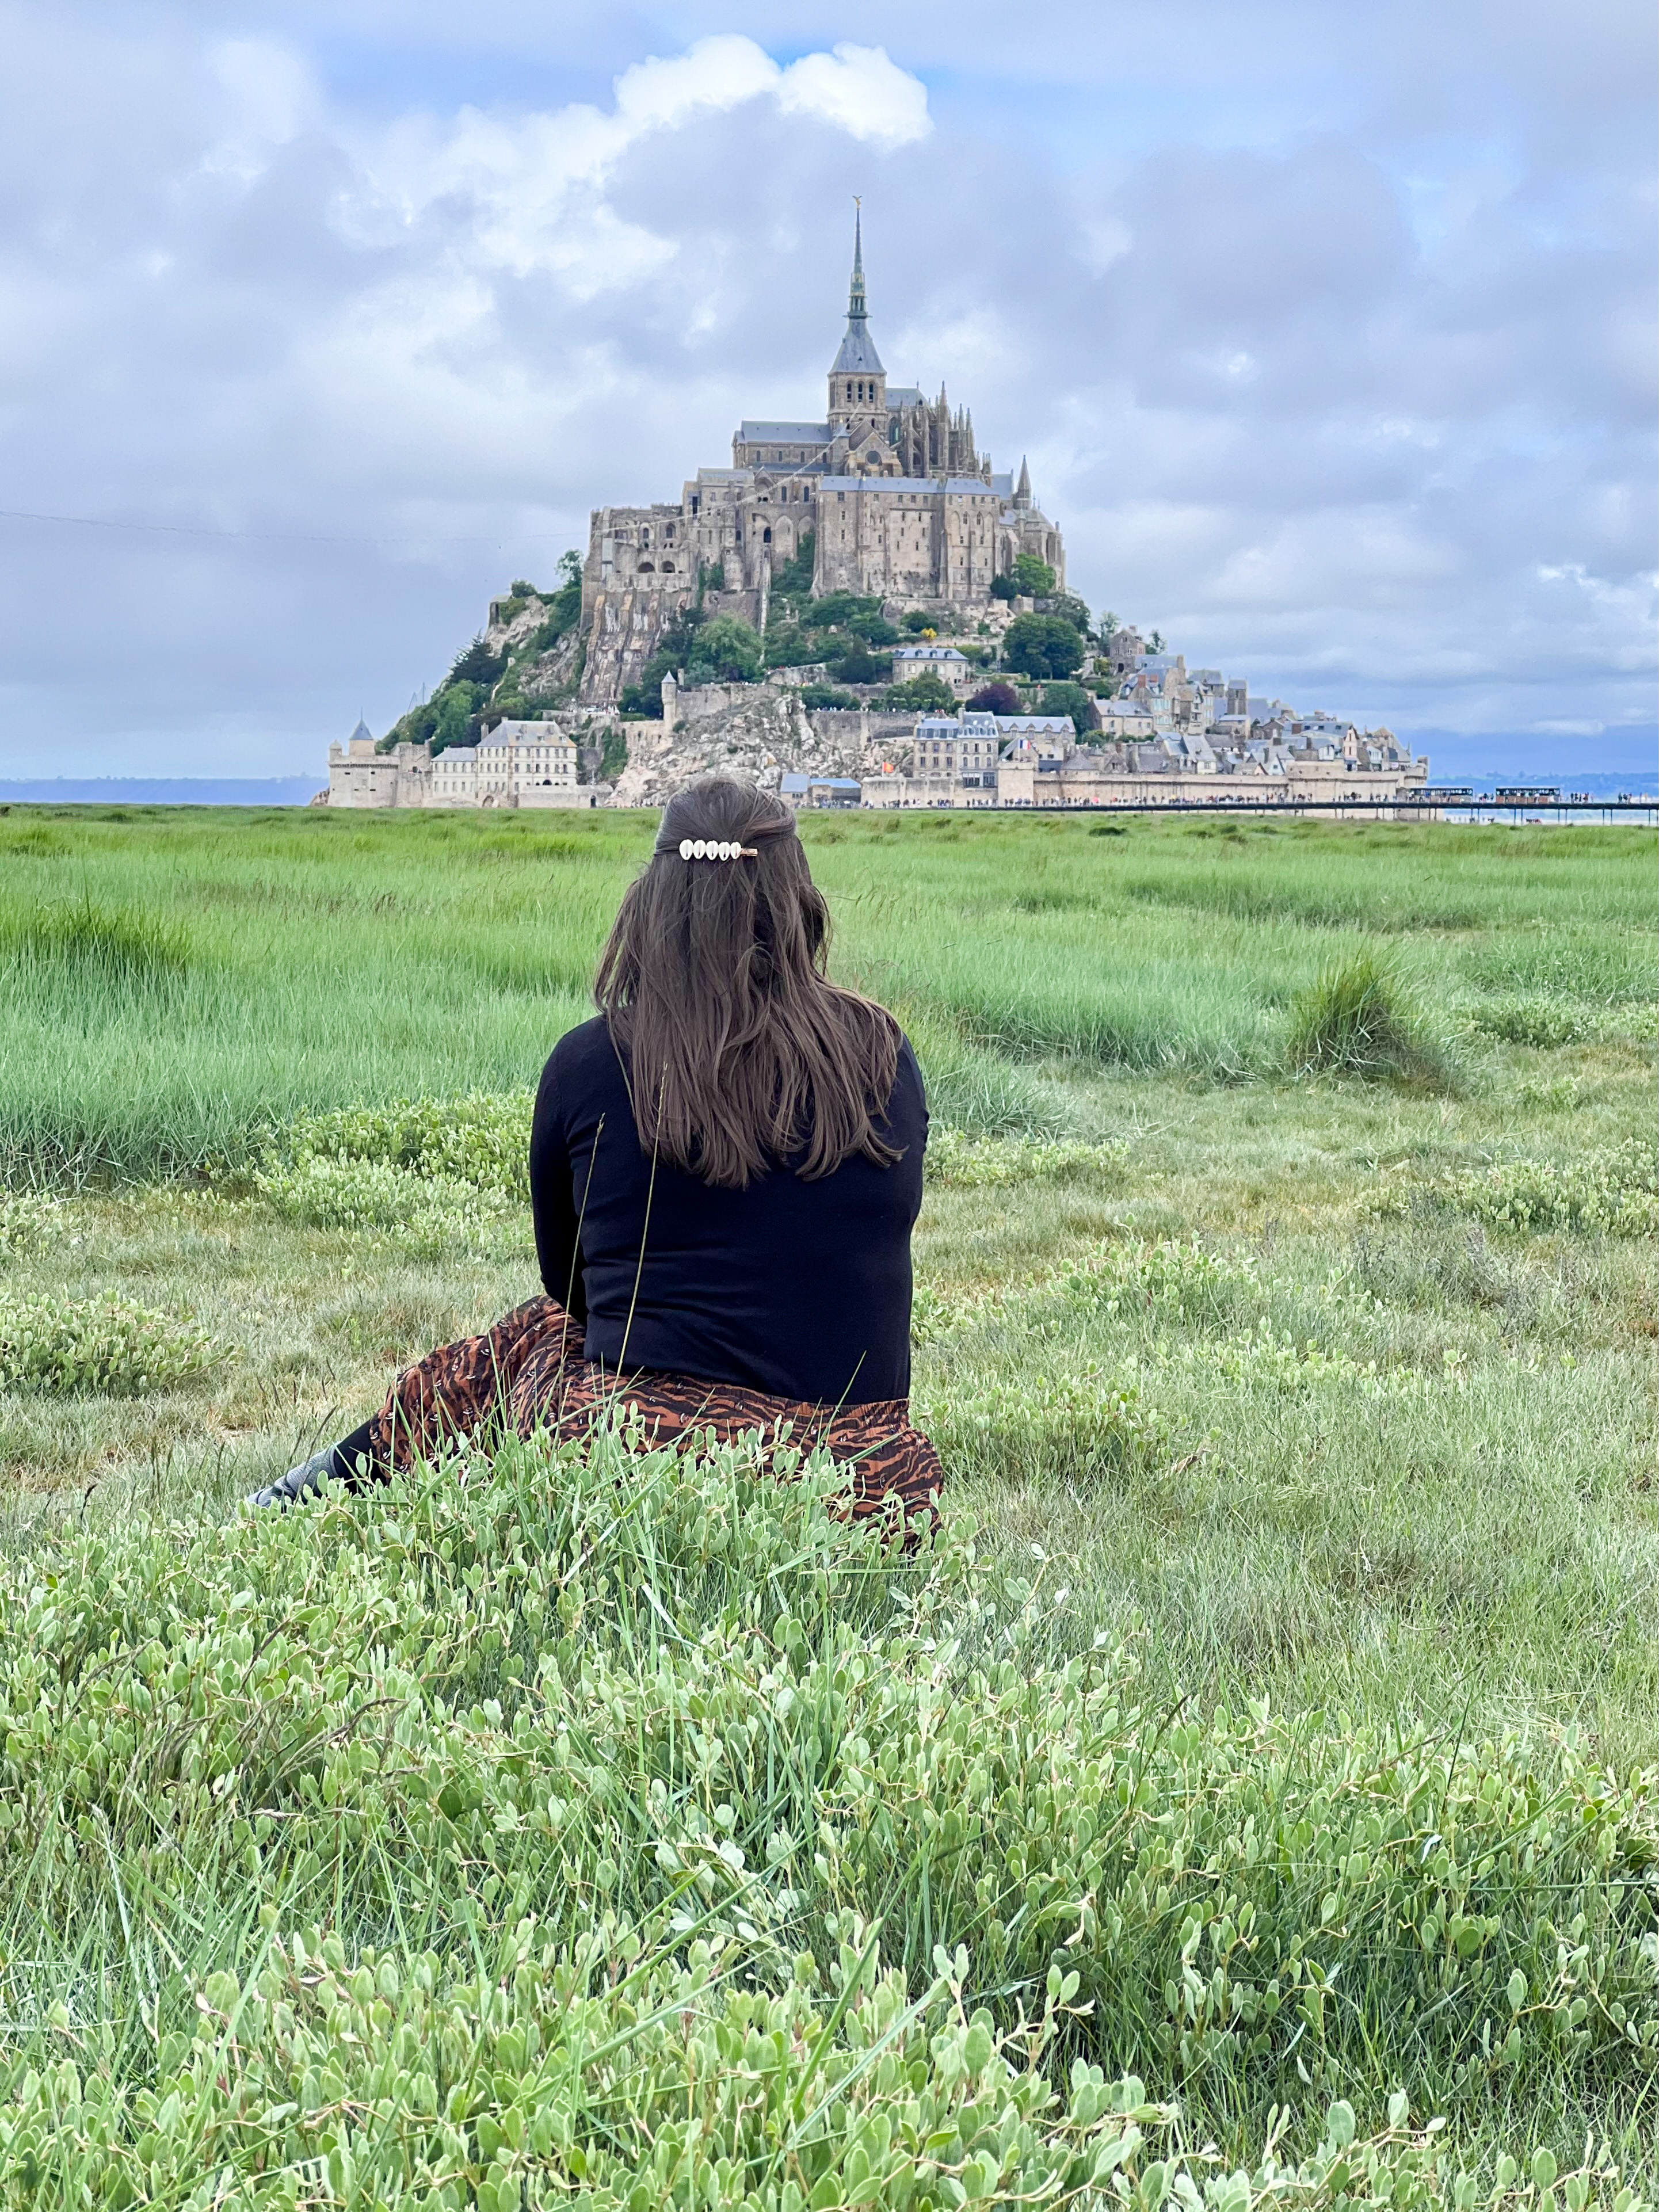 Mont-Saint-Michel: 8 things you probably didn't know about this